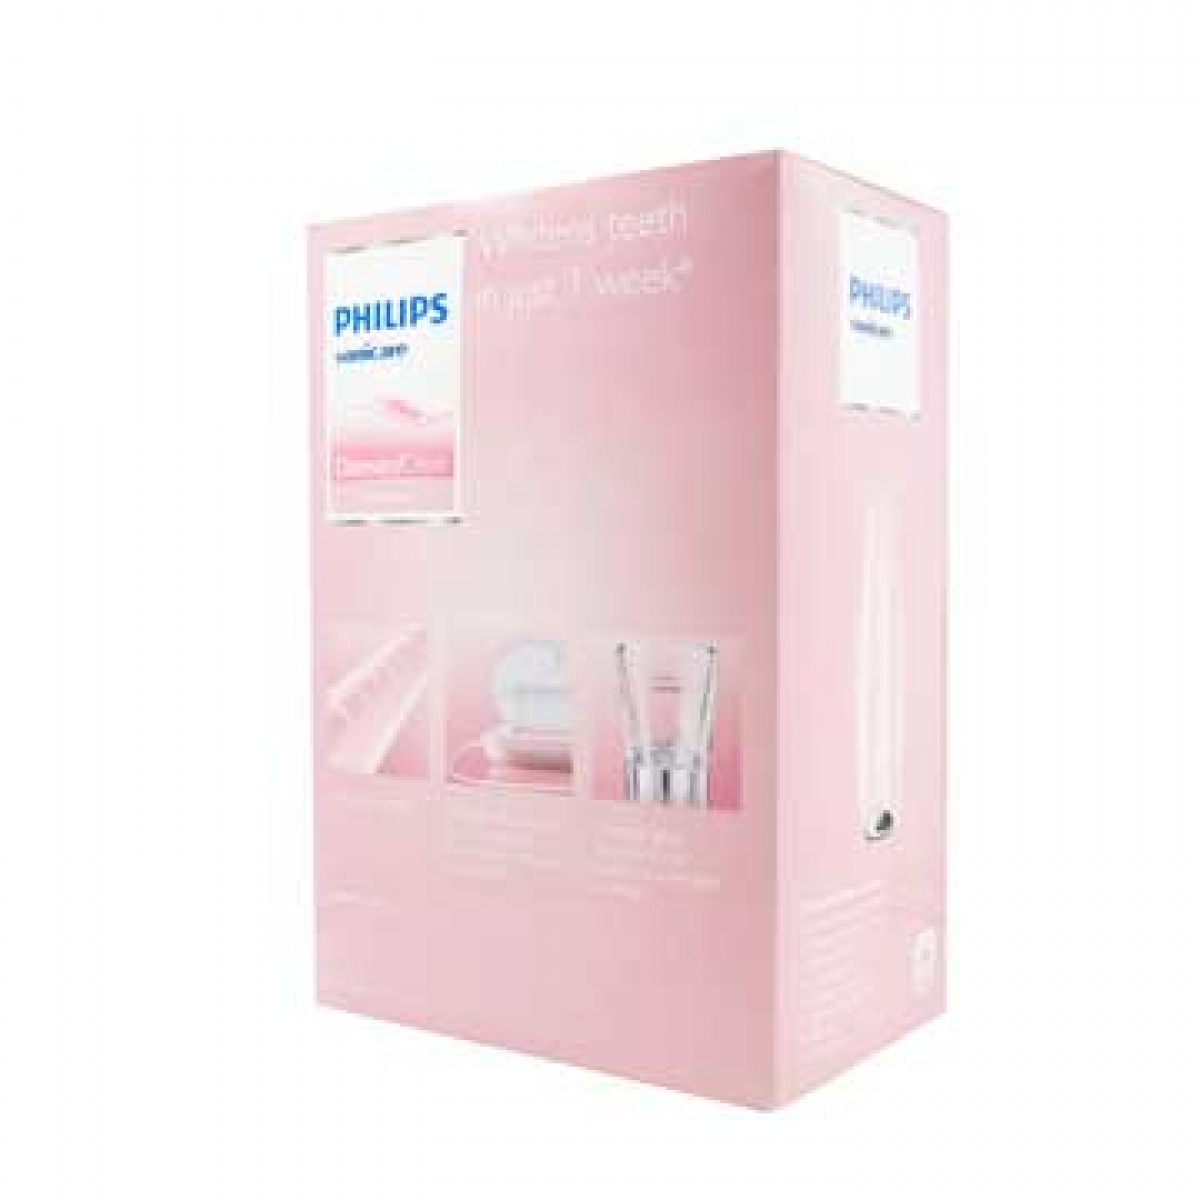 Dental Products